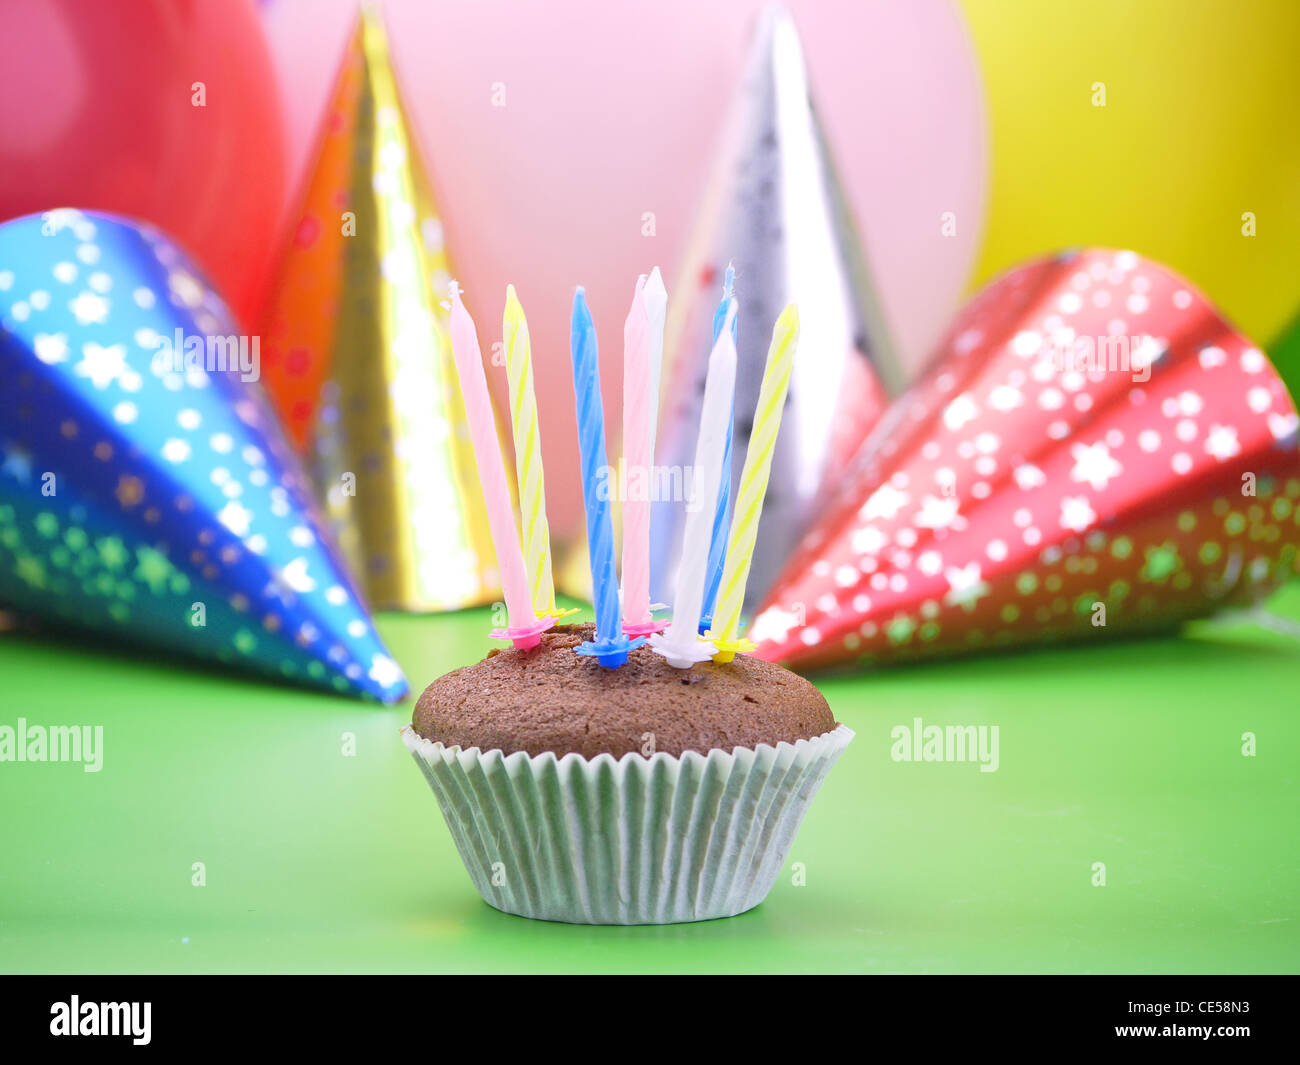 Chocolate muffin with eight candles with party cone caps and balloons in the background Stock Photo